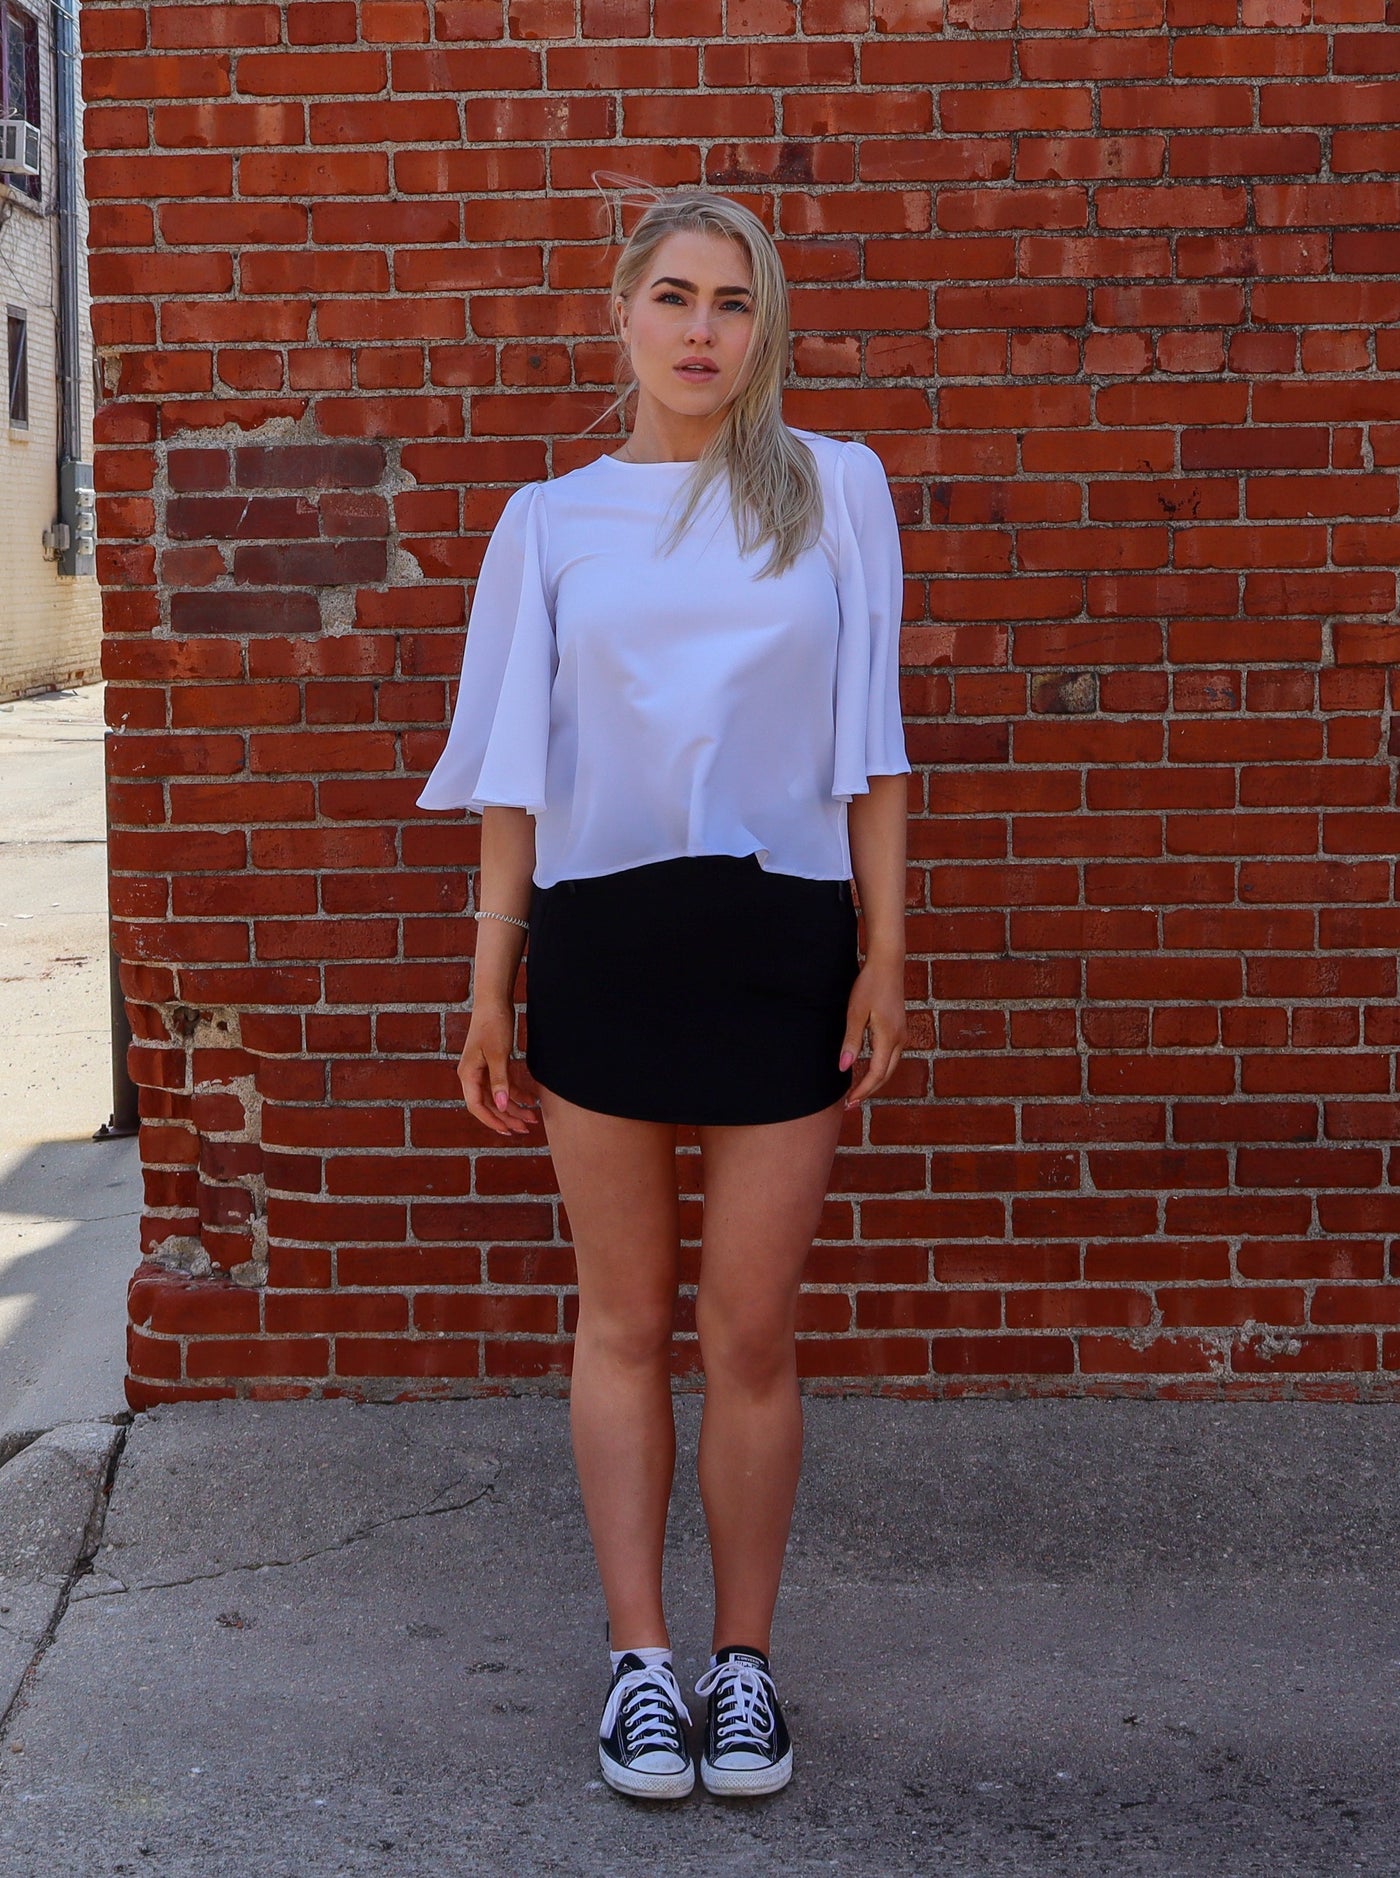 Model is wearing a half sleeve flutter sleeve white blouse, paired with a black tennis skirt.